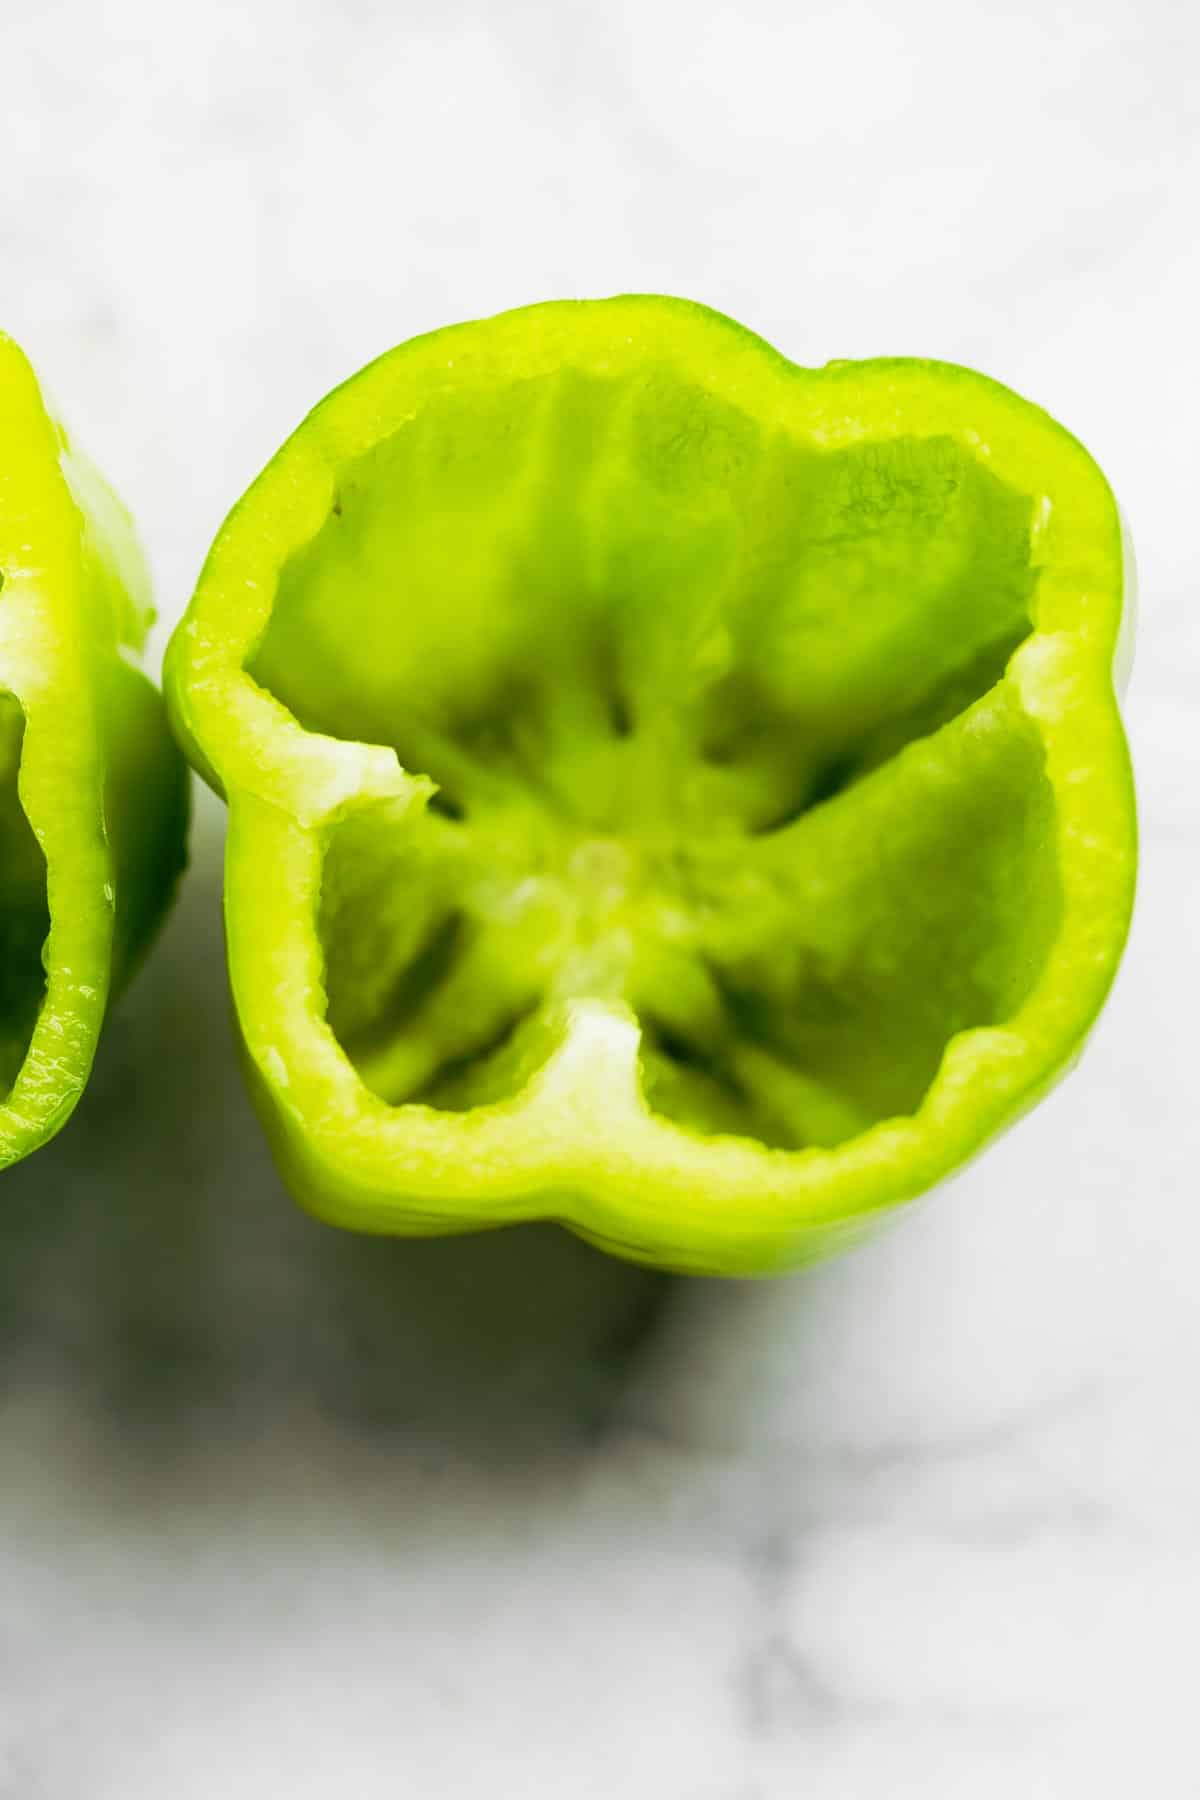 The inside of a green pepper with the top cut off and seeds removed.